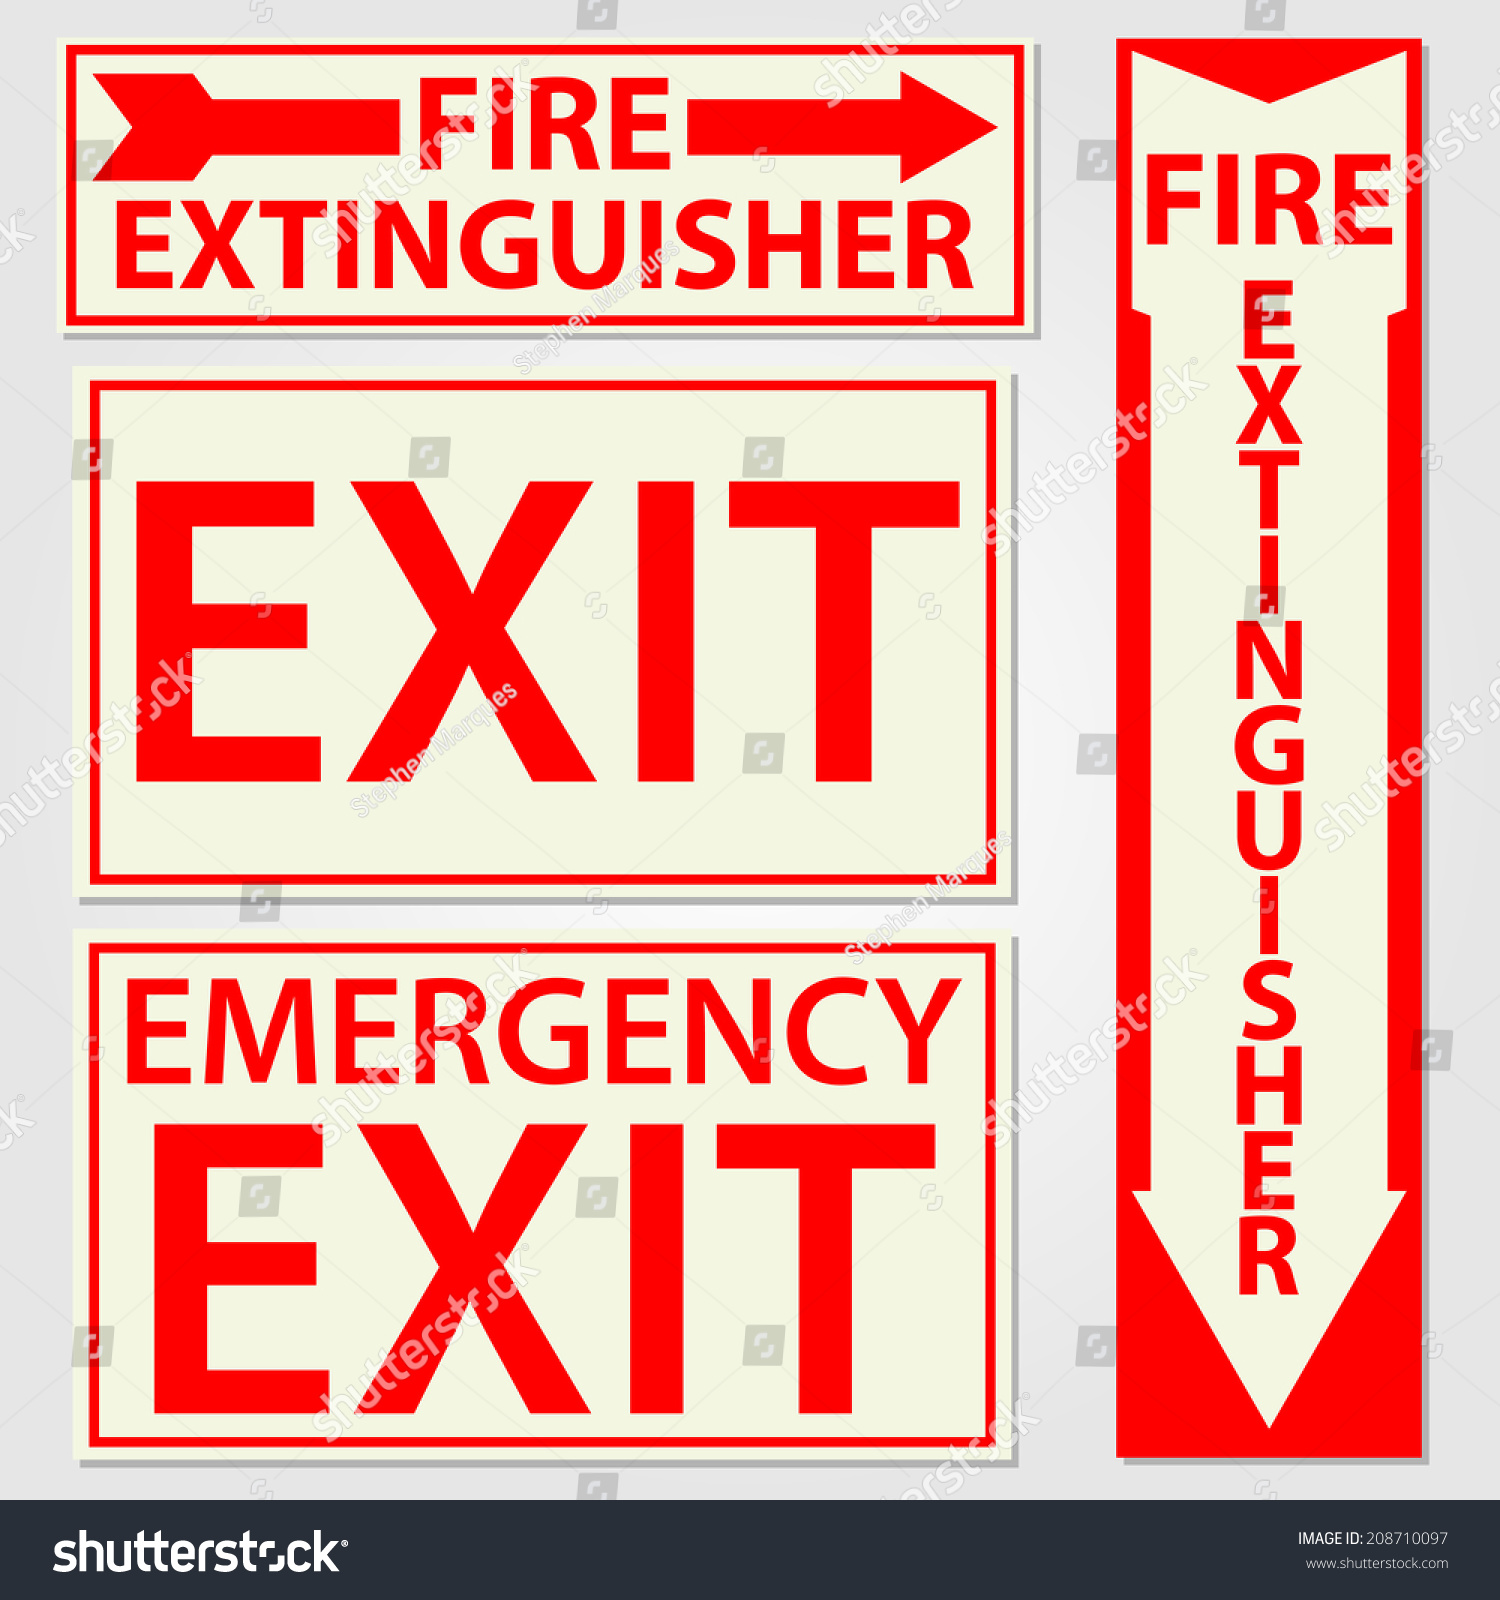 Fire Safety Signs Vector Illustration - 208710097 : Shutterstock